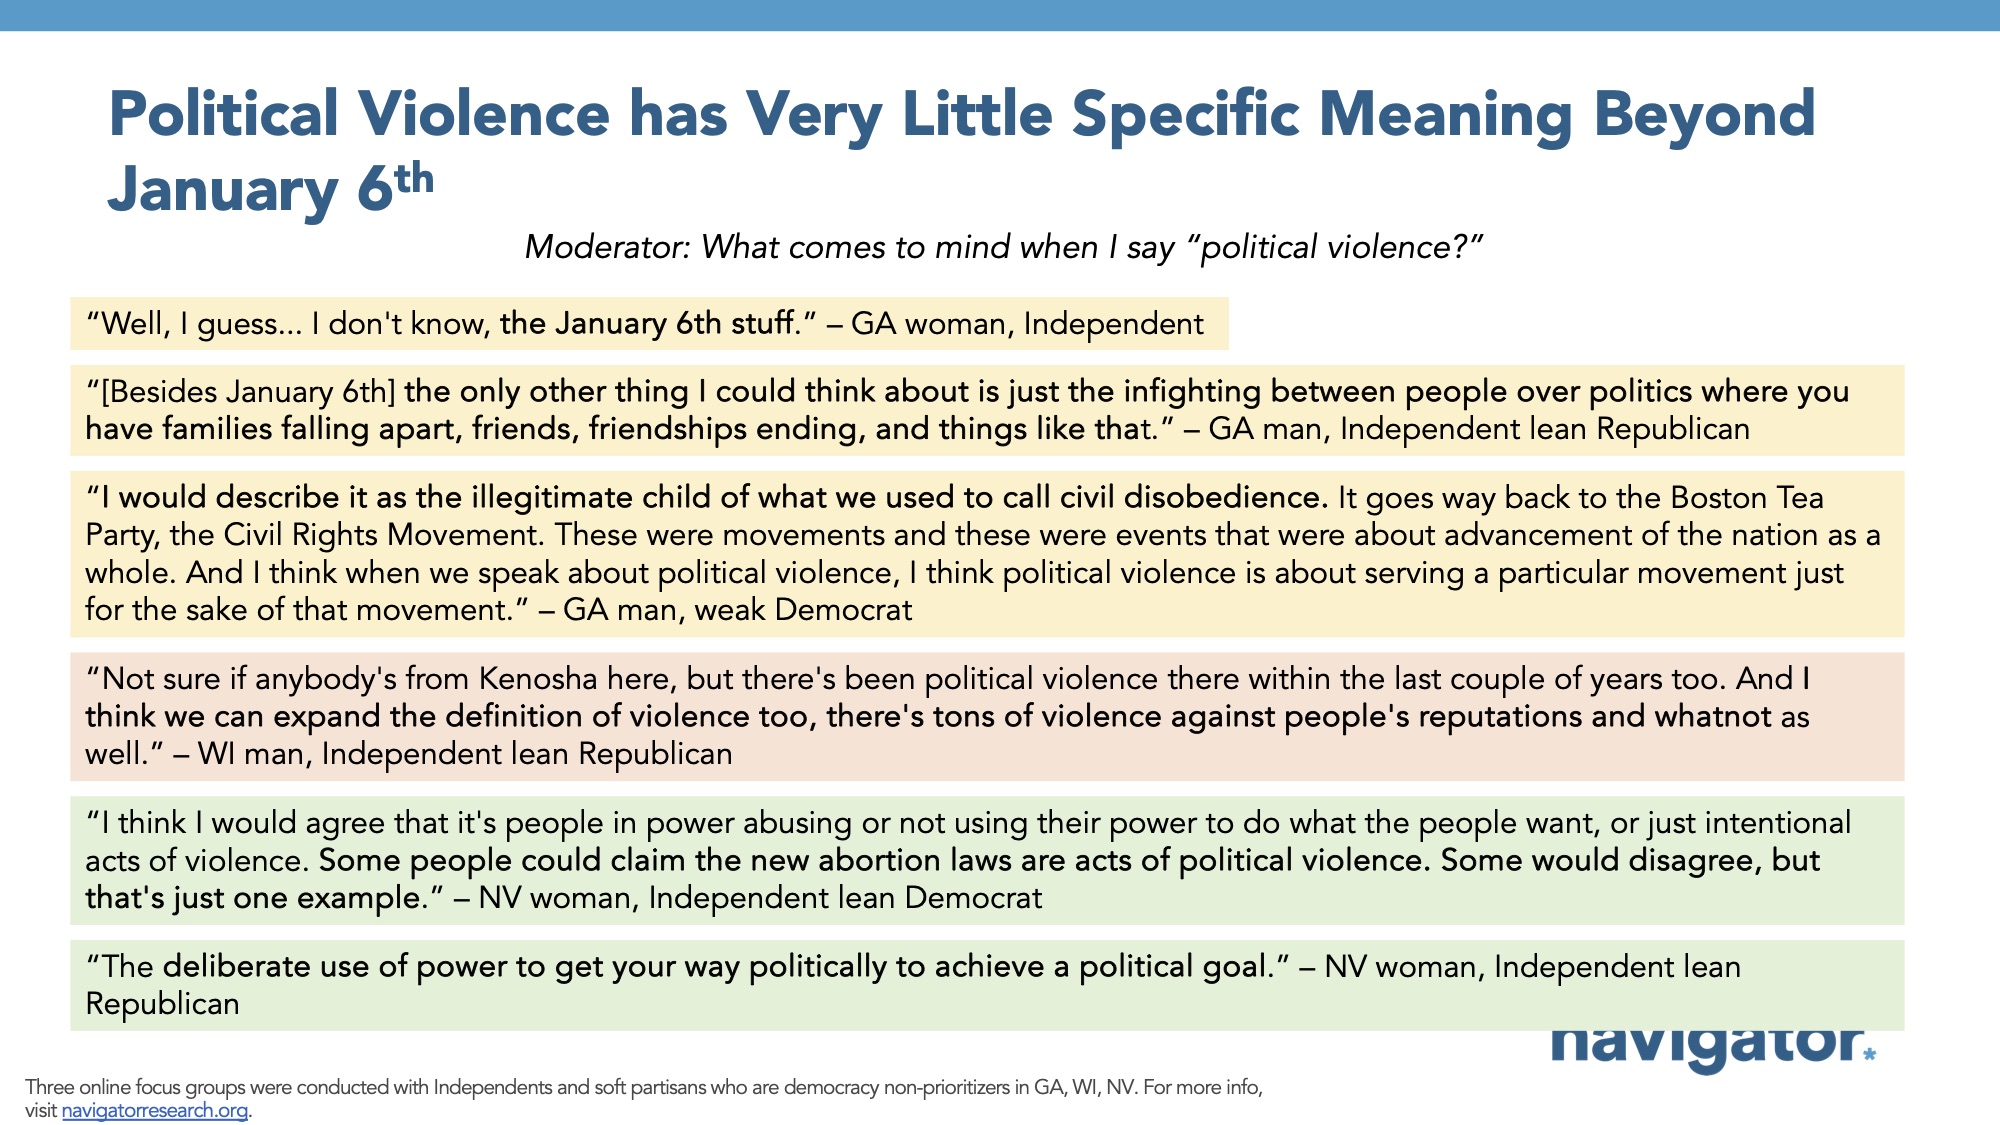 Focus group report slide titled: Political Violence has Very Little Specific Meaning Beyond January 6th